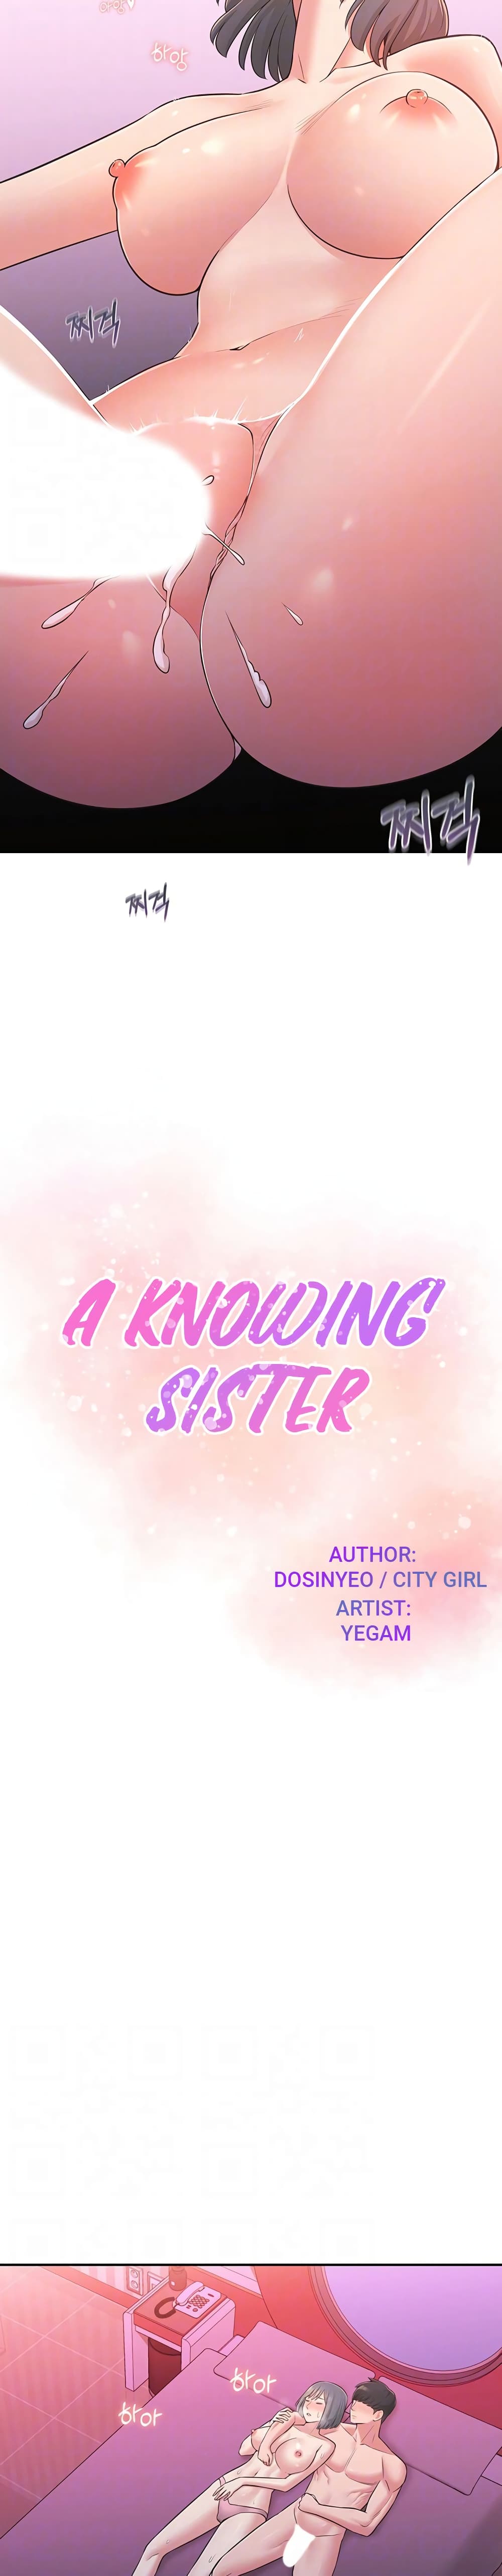 A Knowing Sister 26 04